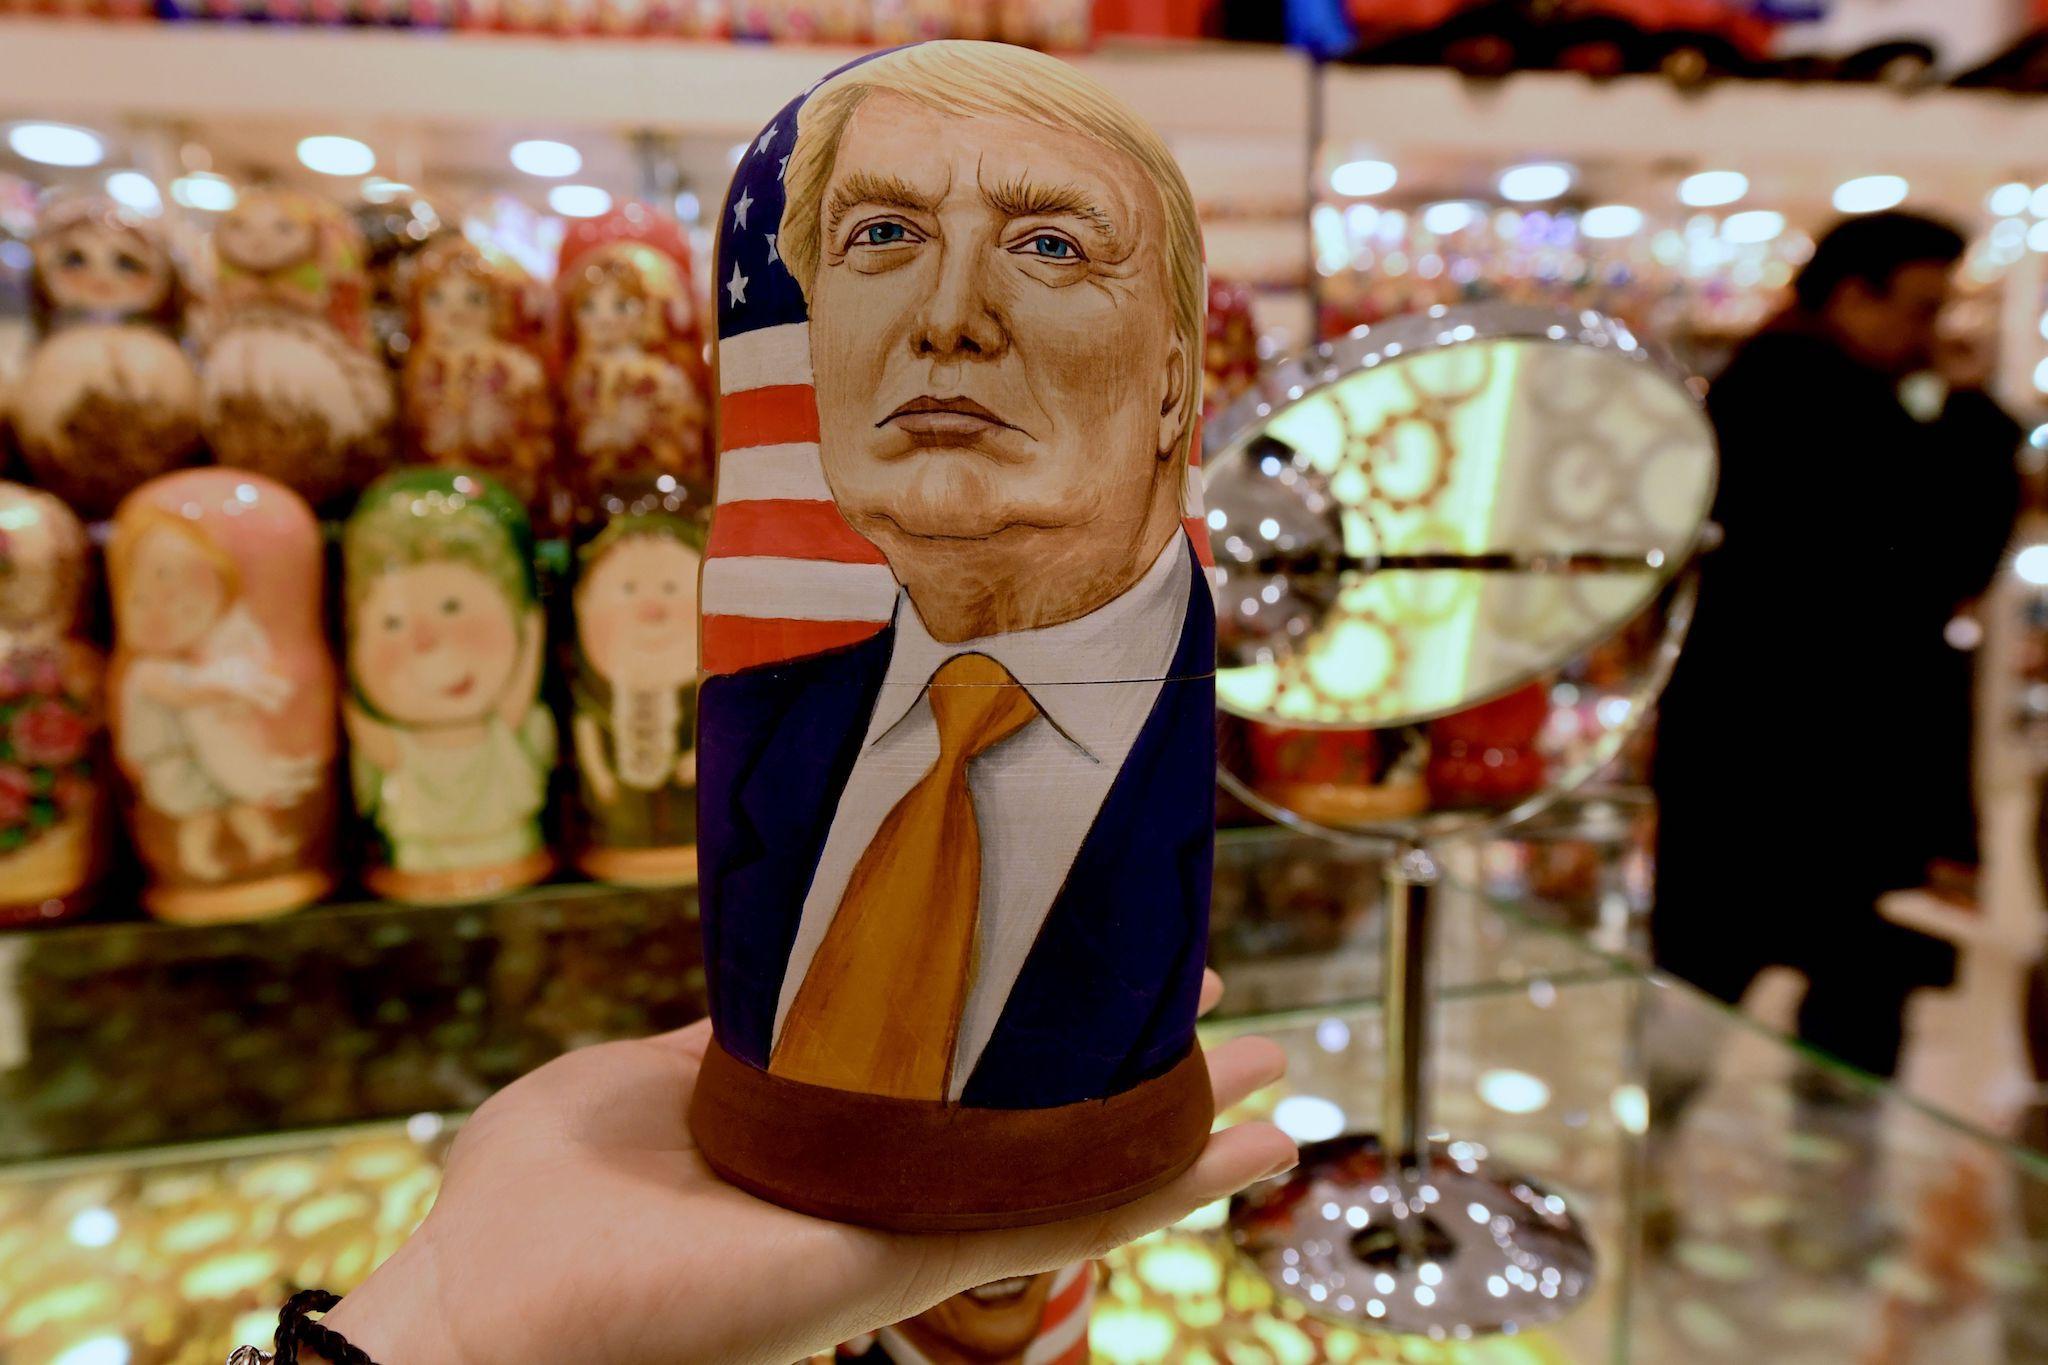 A woman examines a traditional Russian wooden nesting doll, a Matryoshka doll, depicting US Republican presidential nominee Donald Trump at a gift shop in central Moscow on November 8, 2016